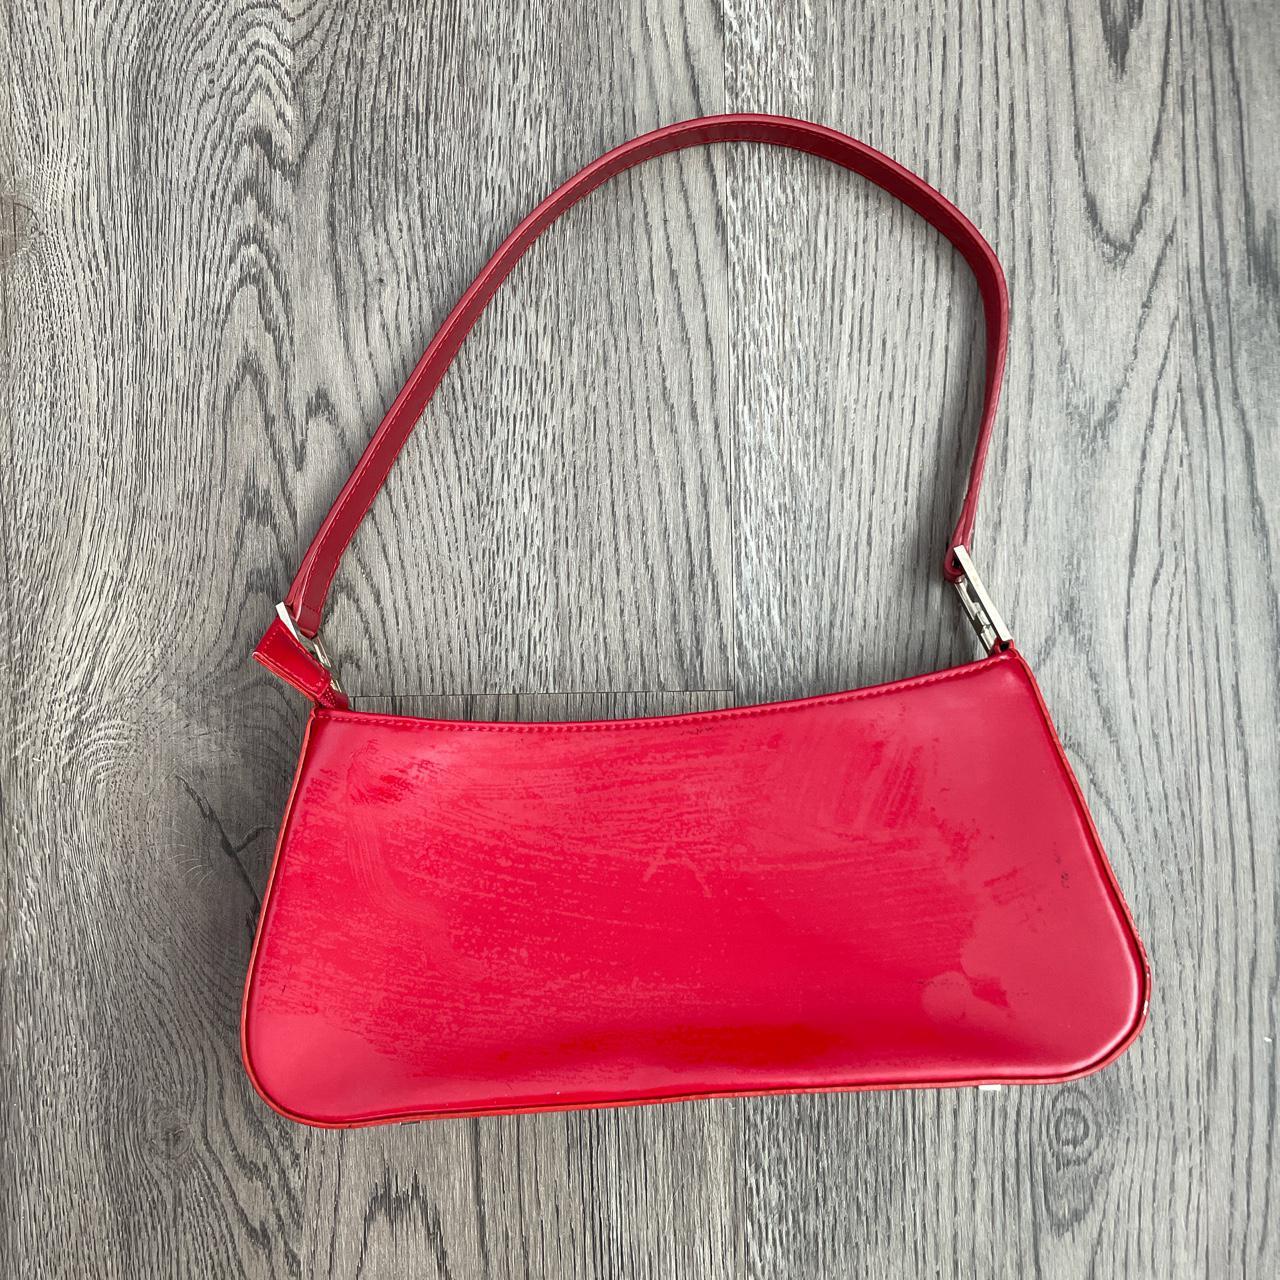 Product Image 2 - Modern red structured bag with